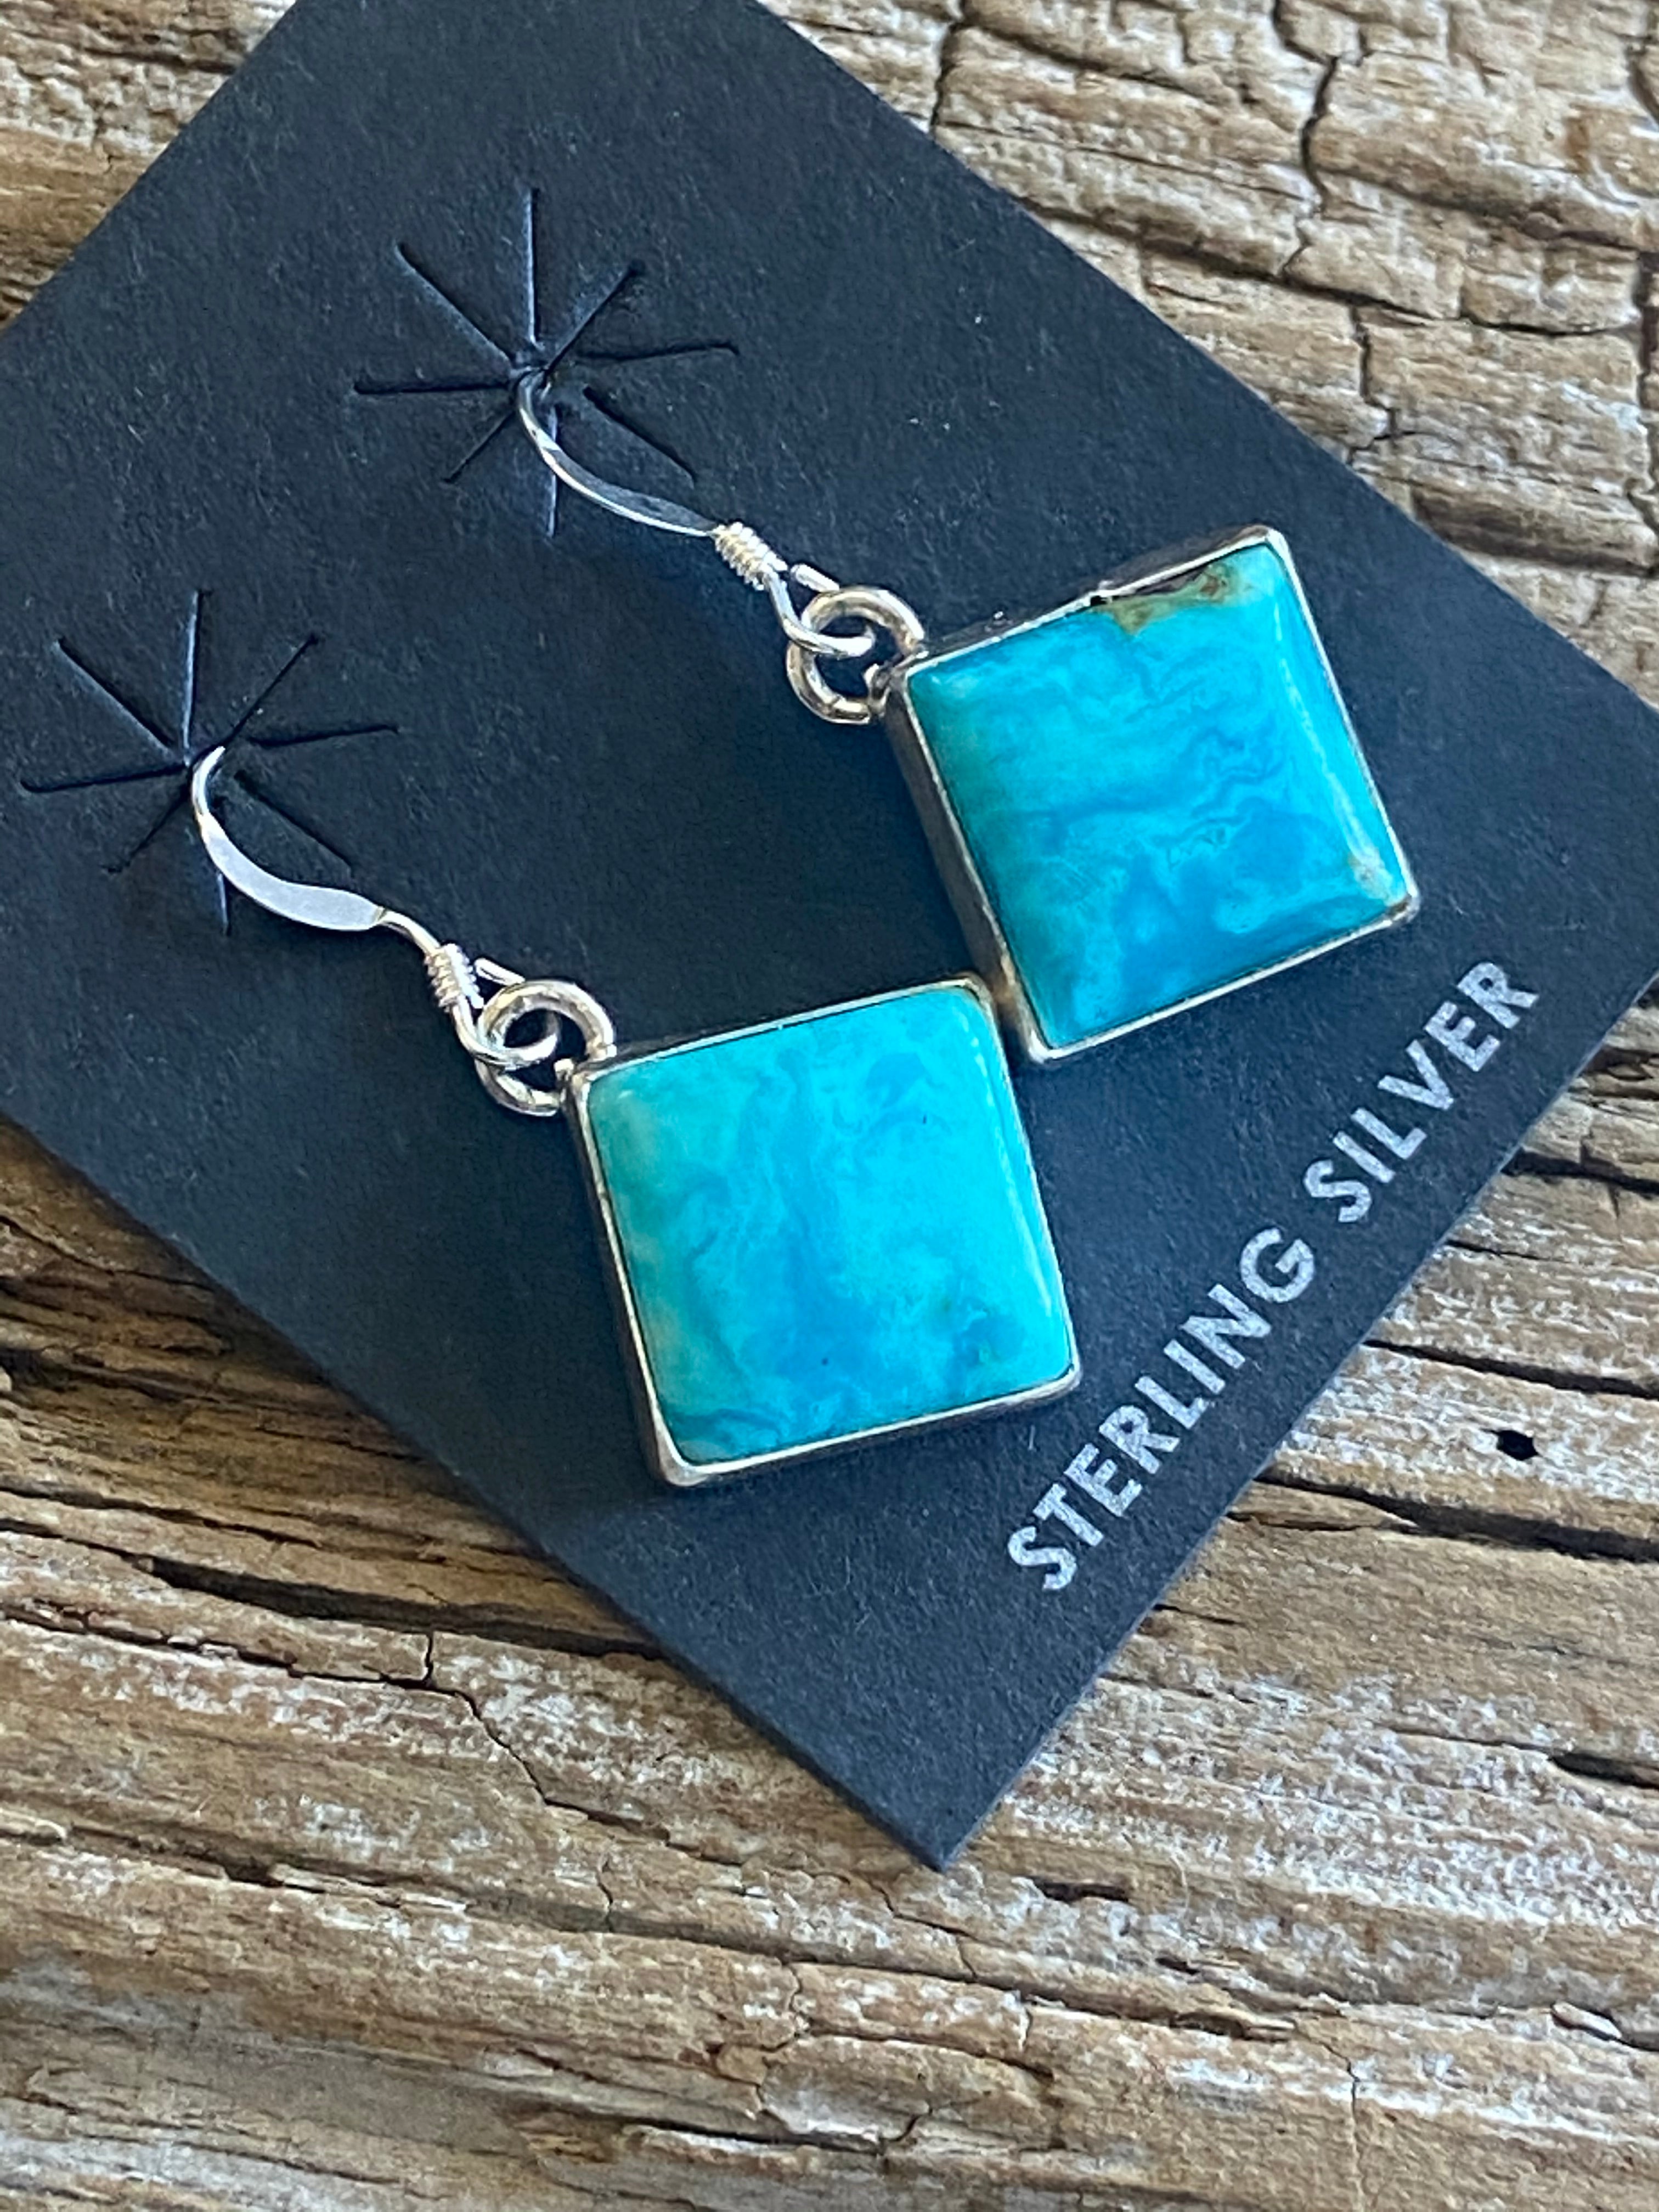 Navajo Turquoise & Sterling Silver Dangles